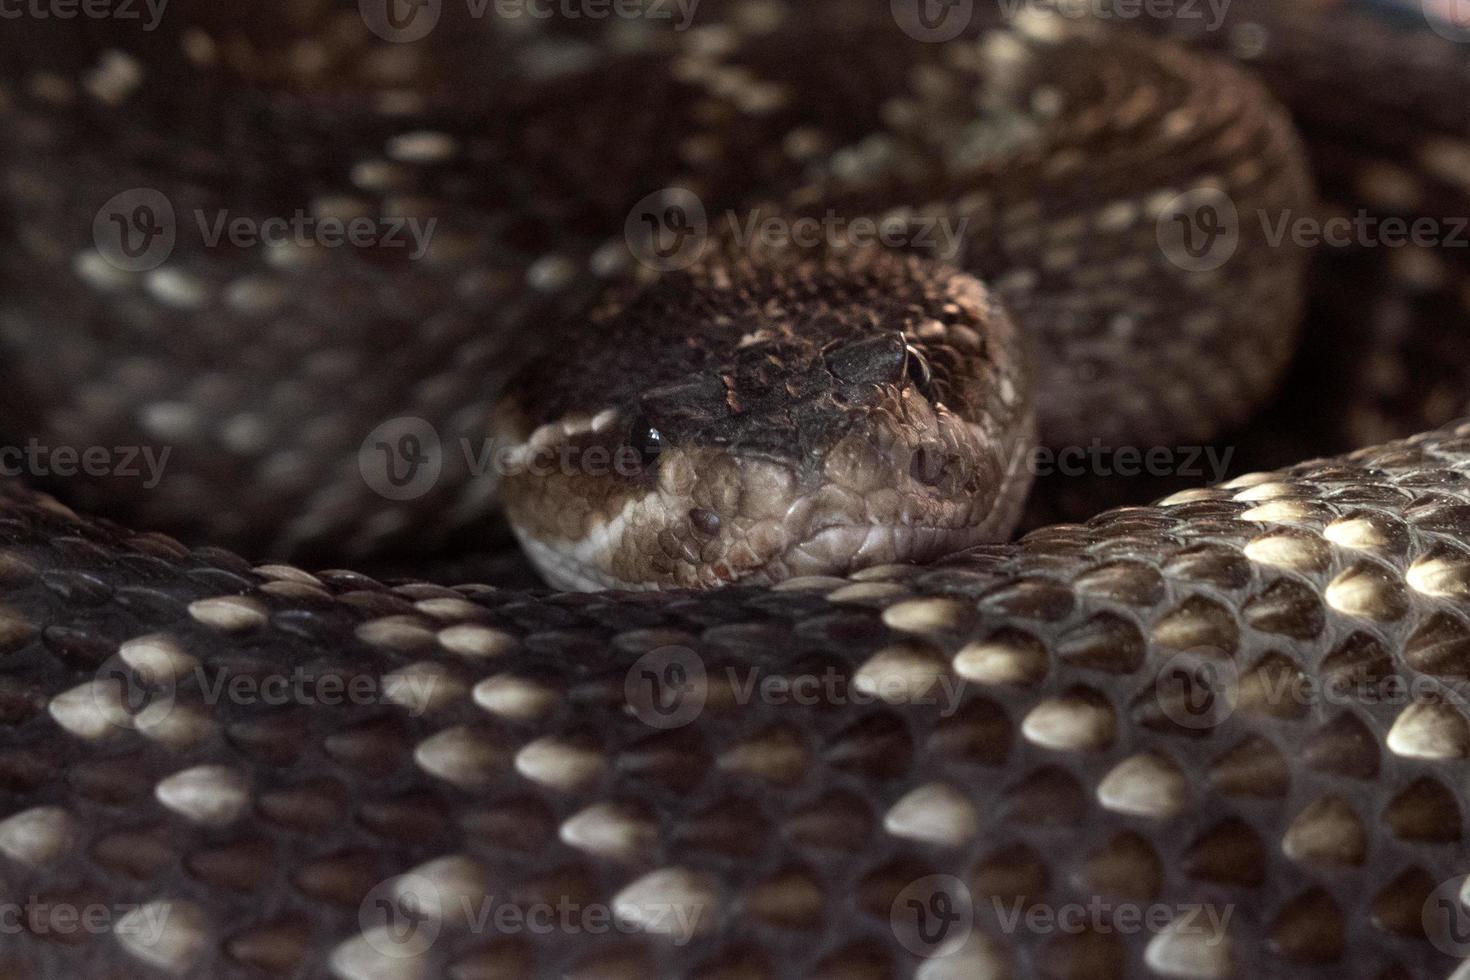 Deadly rattle snake close up photo